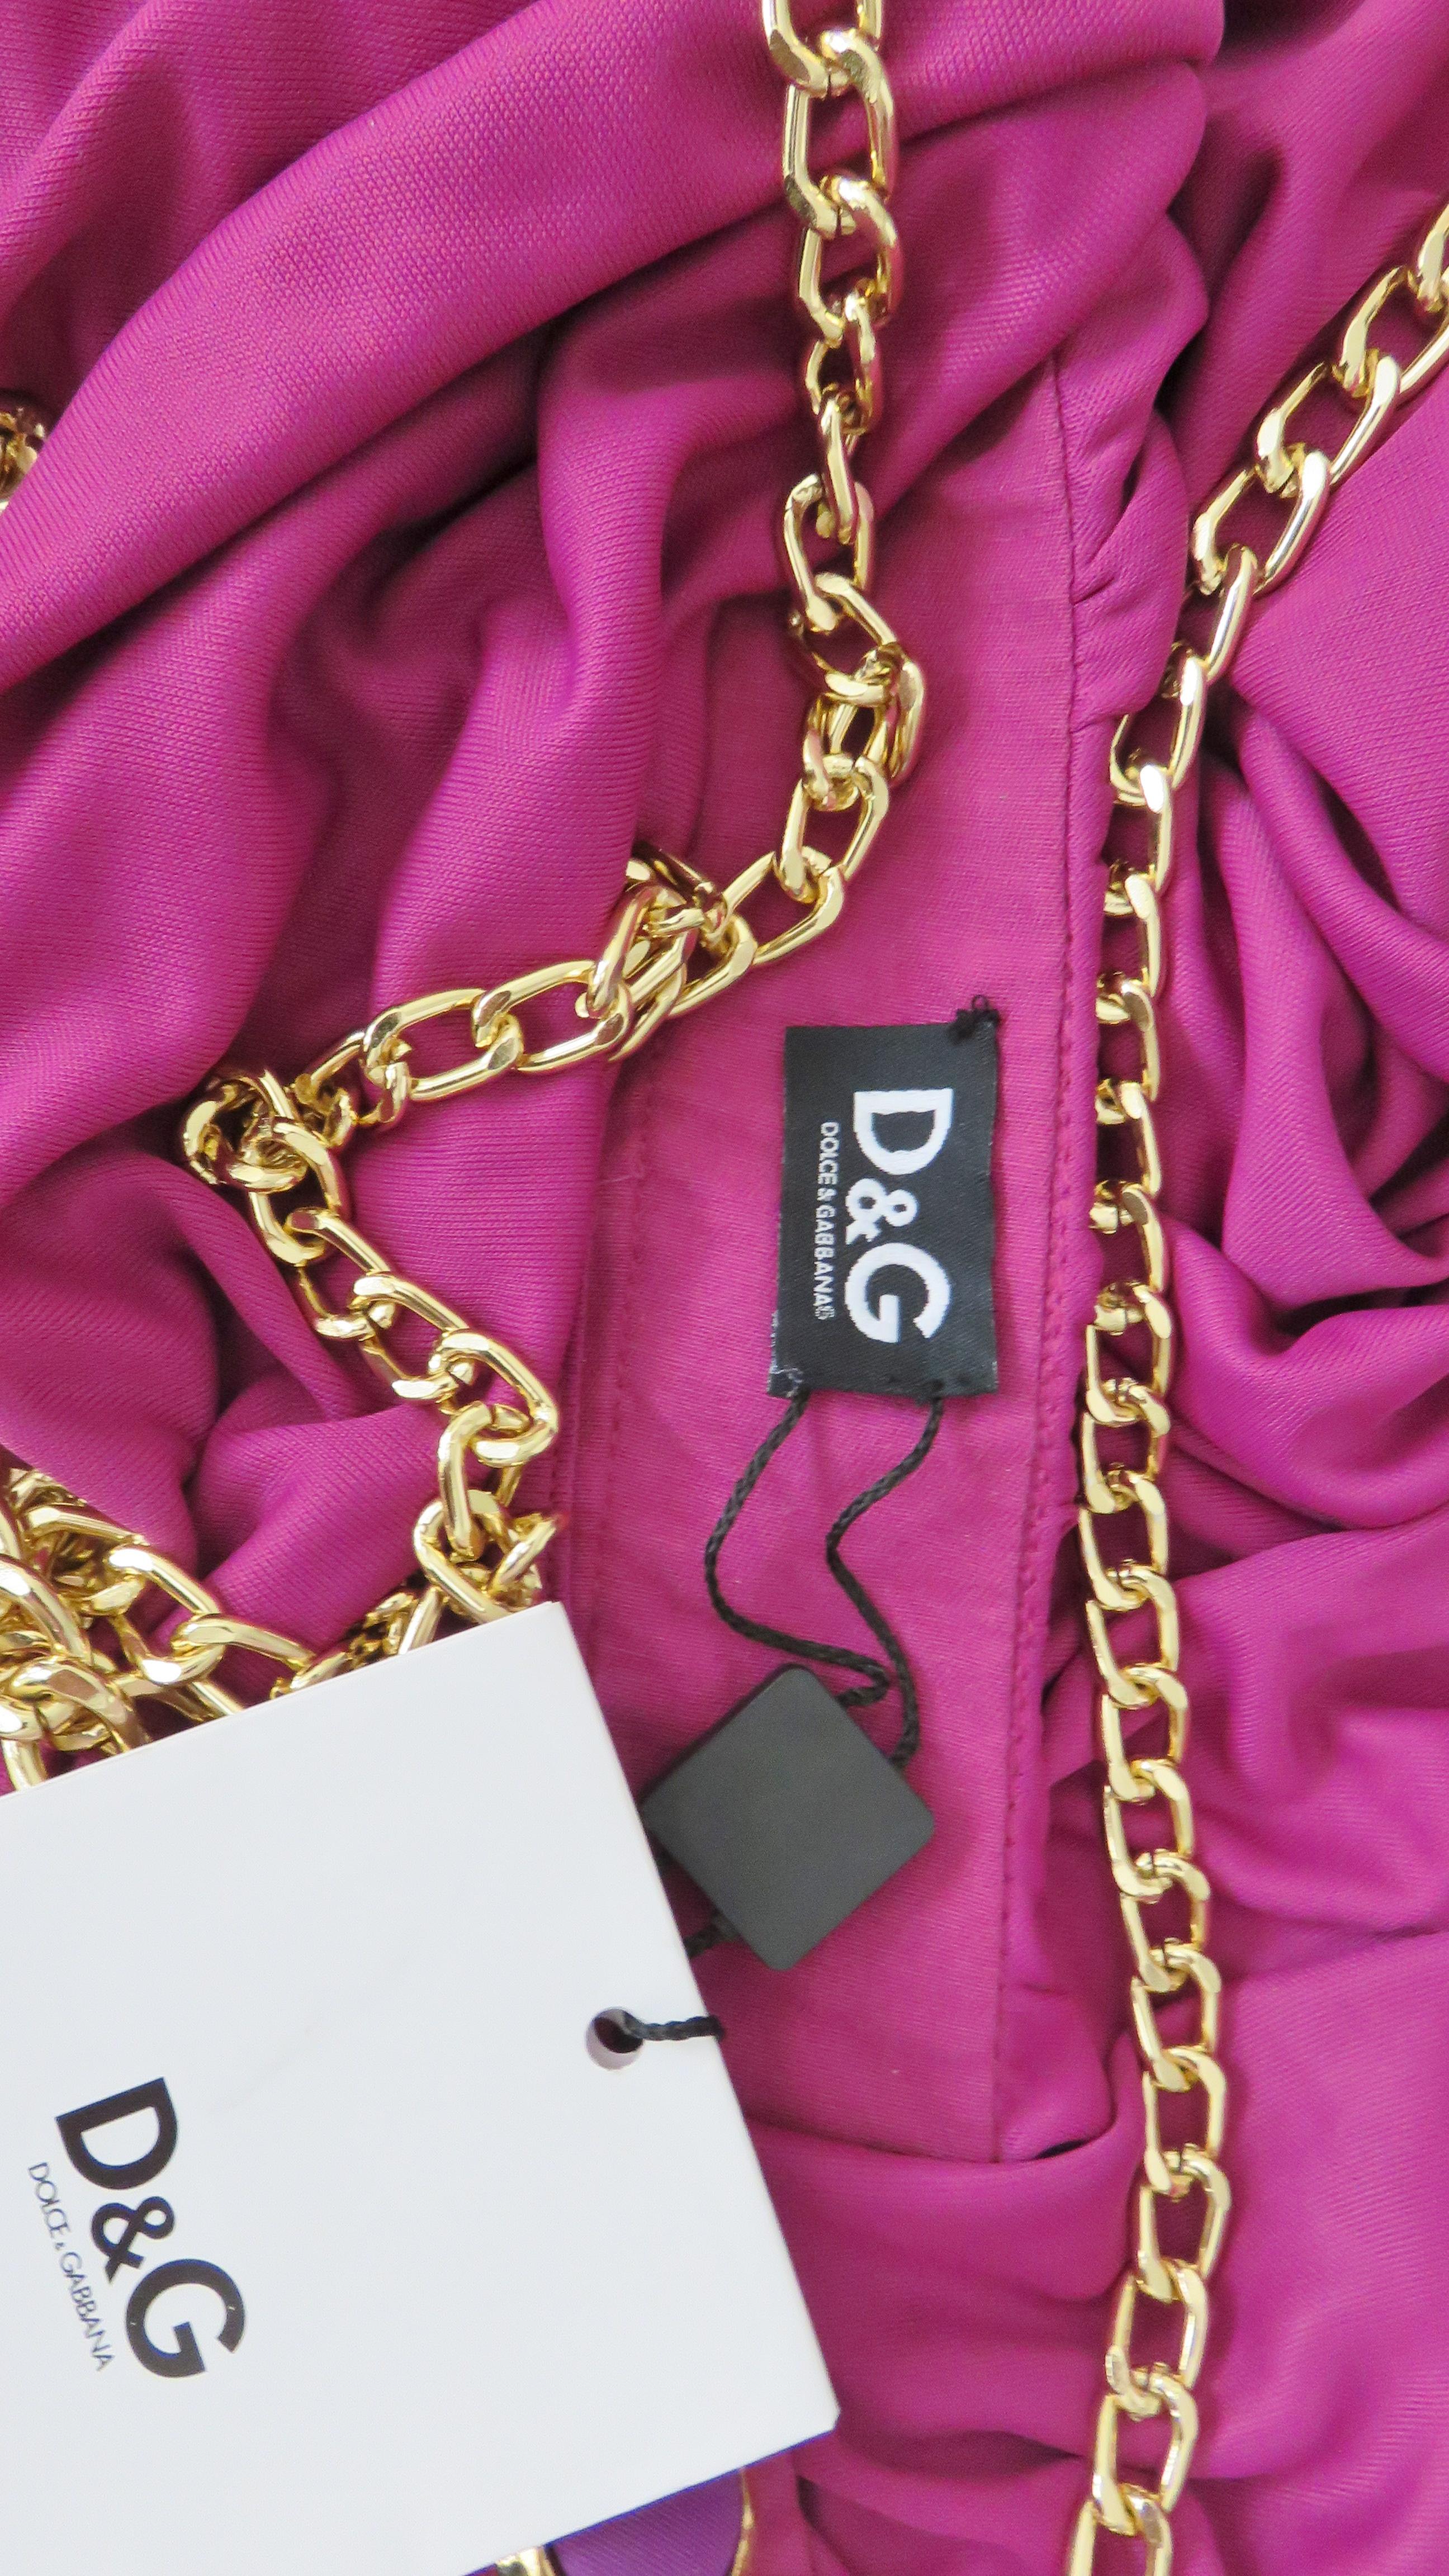 Dolce & Gabbana New One Sleeve Dress with Chains 5